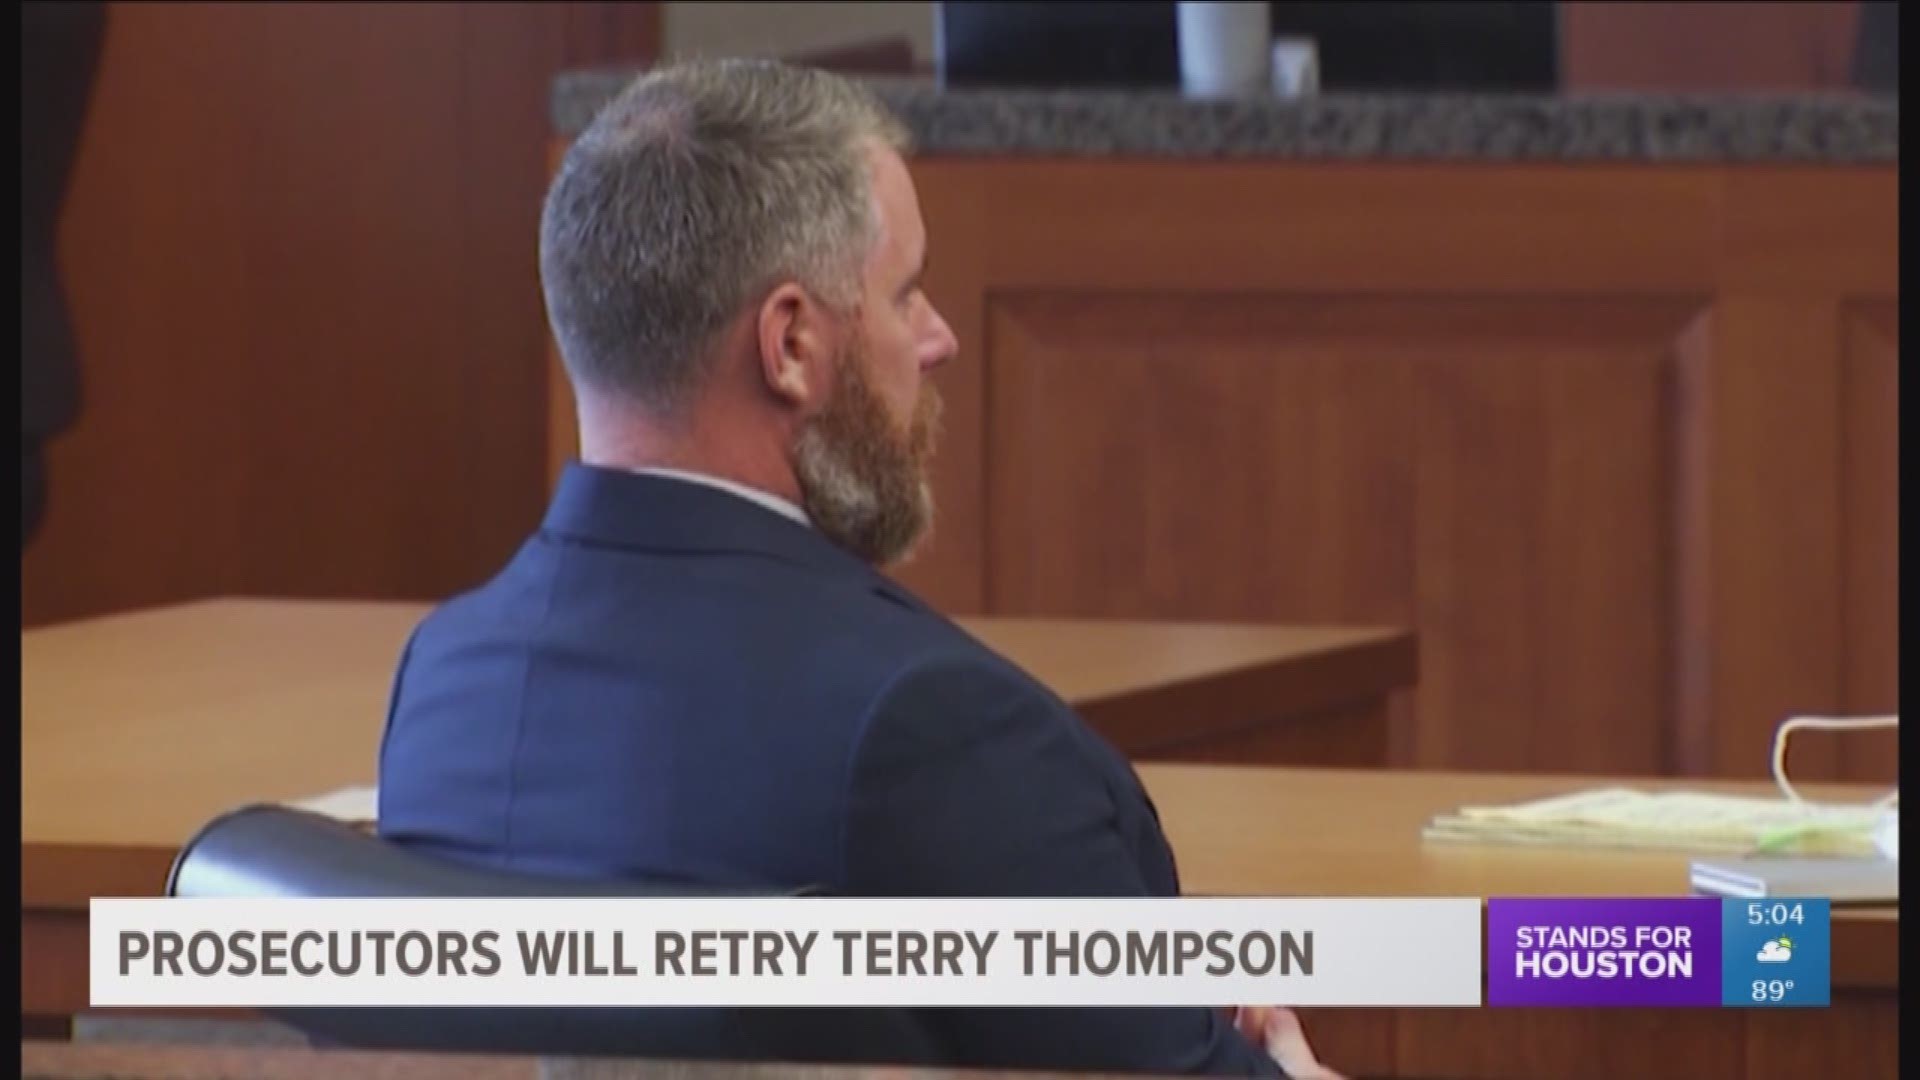 The Harris County District Attorney will retry Terry Thompson for homicide.